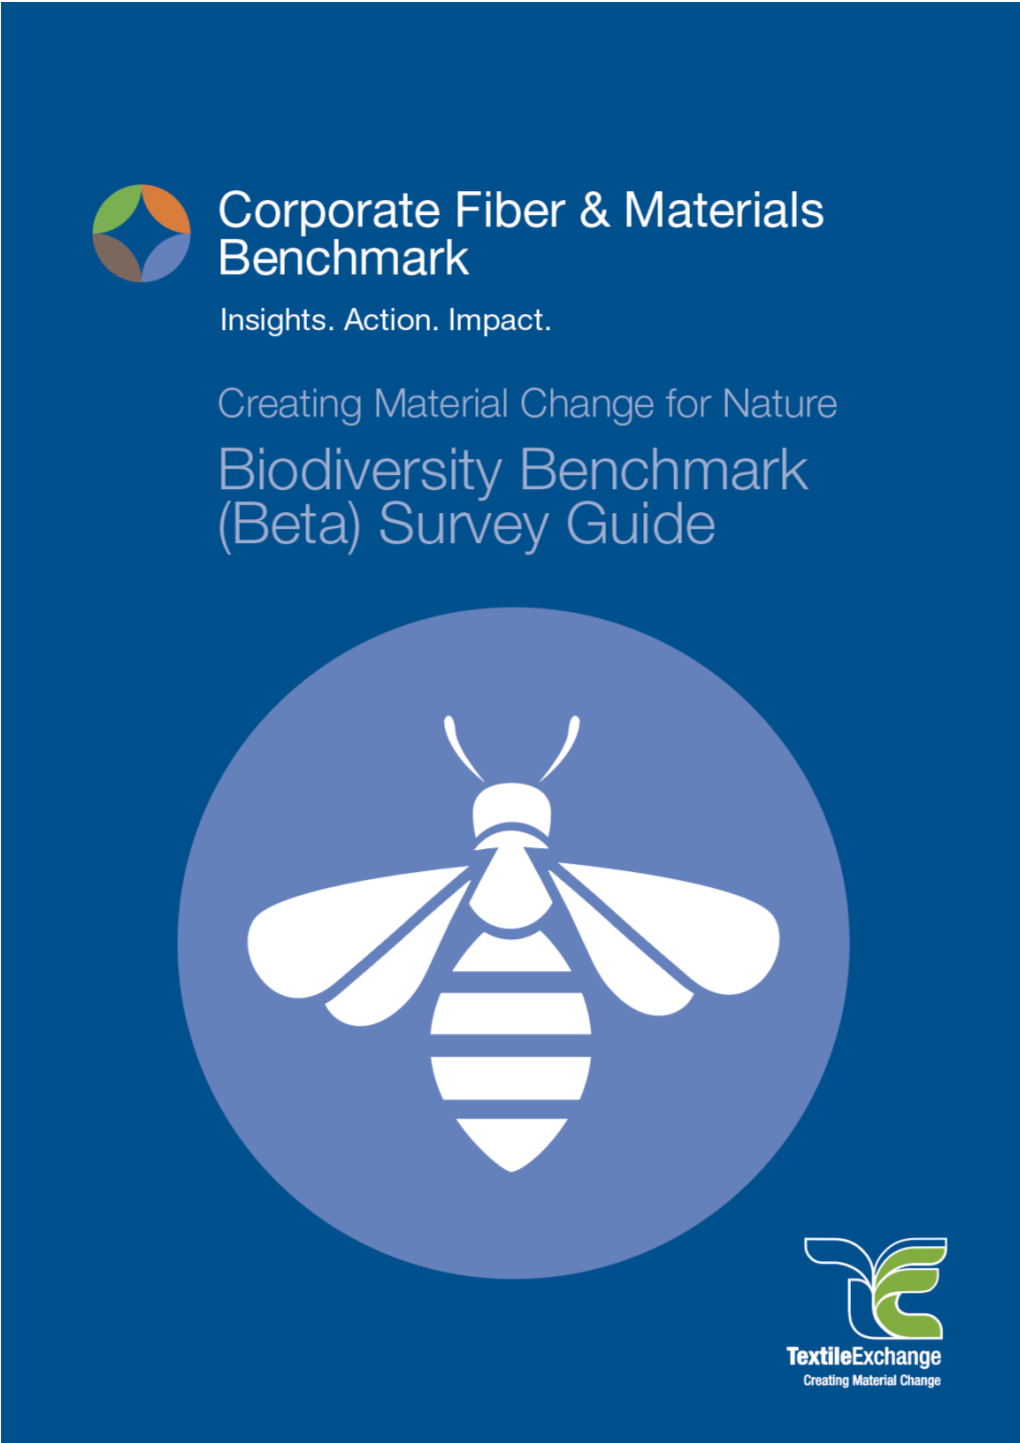 Biodiversity Benchmark Survey Guide Provides Pragmatic Guidance to Help Companies Complete the Survey